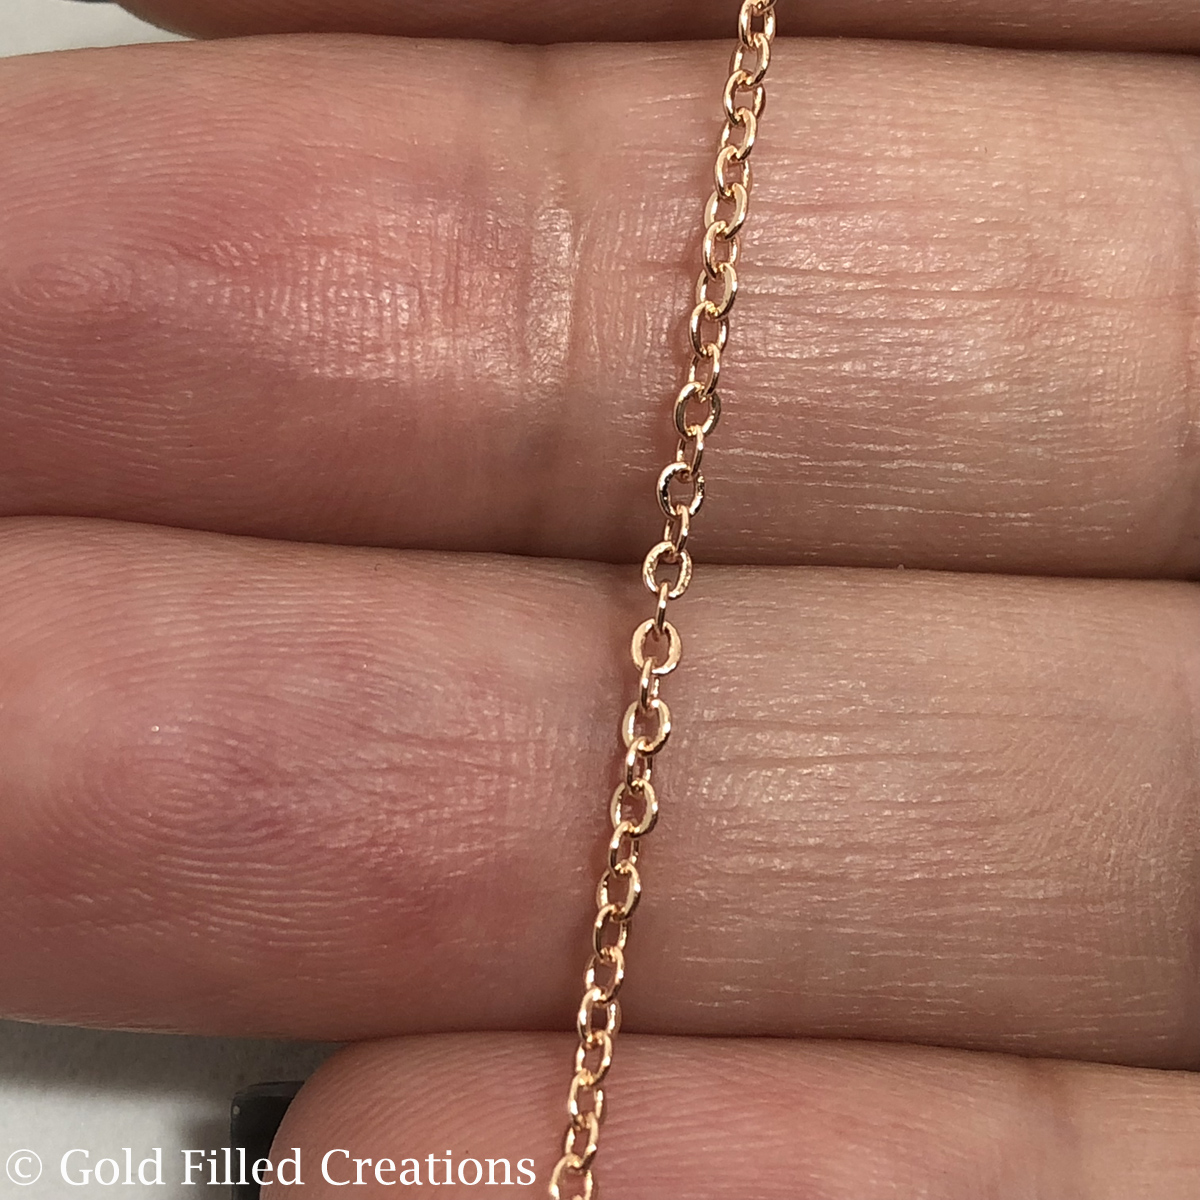 Delicate Round Trace Chain 14,15,16,17,18,19,20,22,23,24,25,26,27 and 28 In Rose Gold Filled Cable Chain Strong Pendant /& Necklace Chain